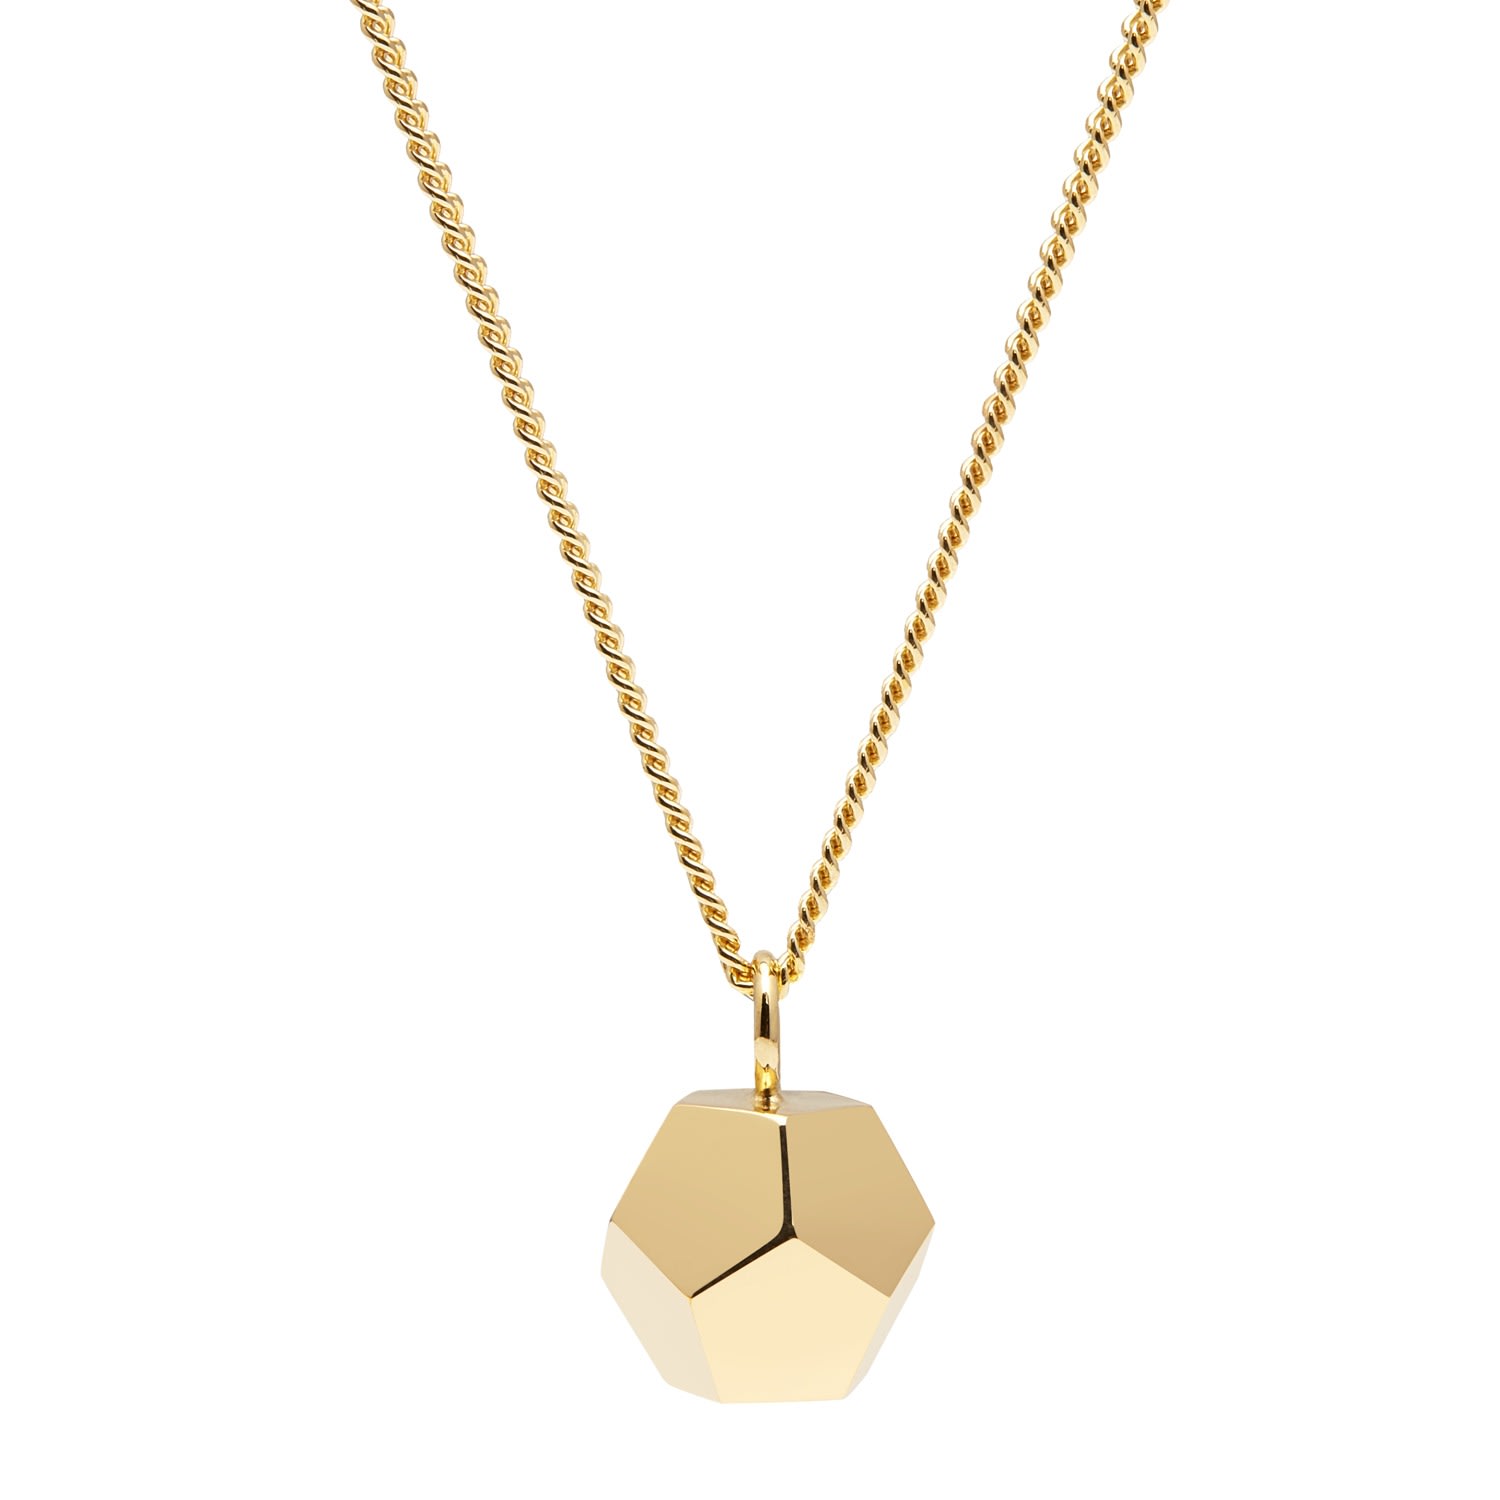 Women's Gold Dodecahedron Pendant Necklace Myia Bonner